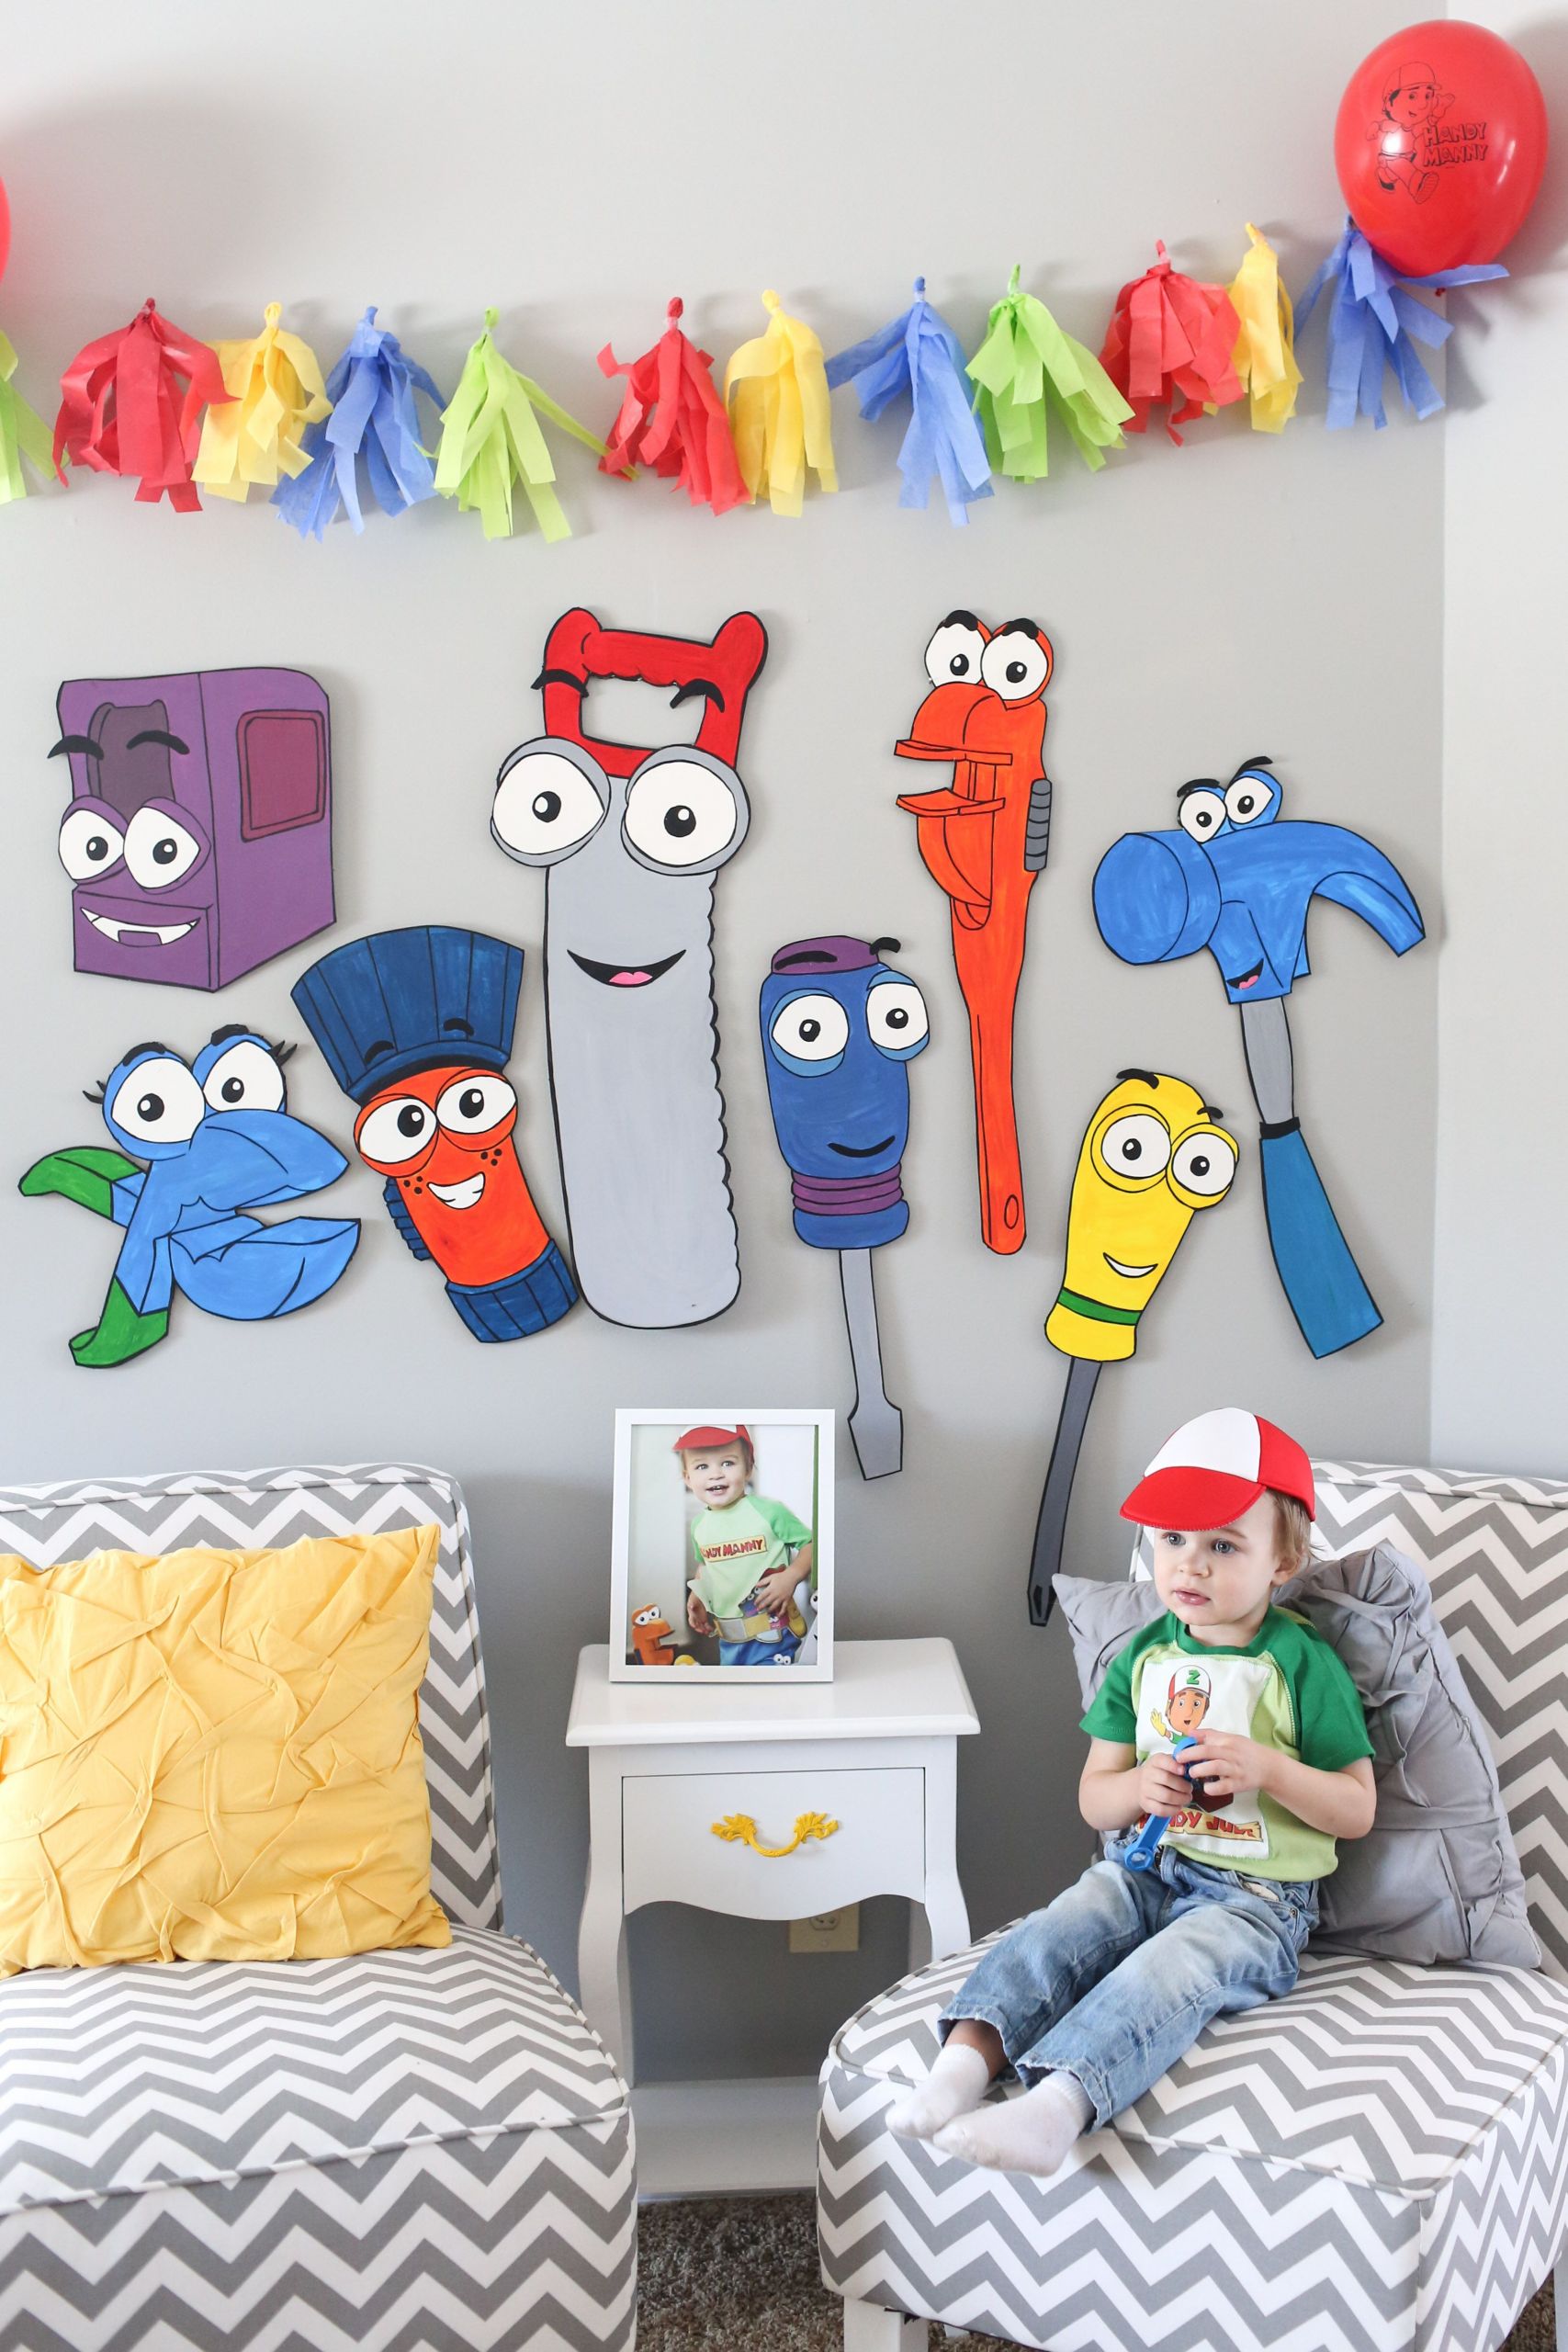 Handy Manny Birthday Decorations
 TWO YEAR OLD BIRTHDAY PARTY HANDY MANNY BIRTHDAY PARTY